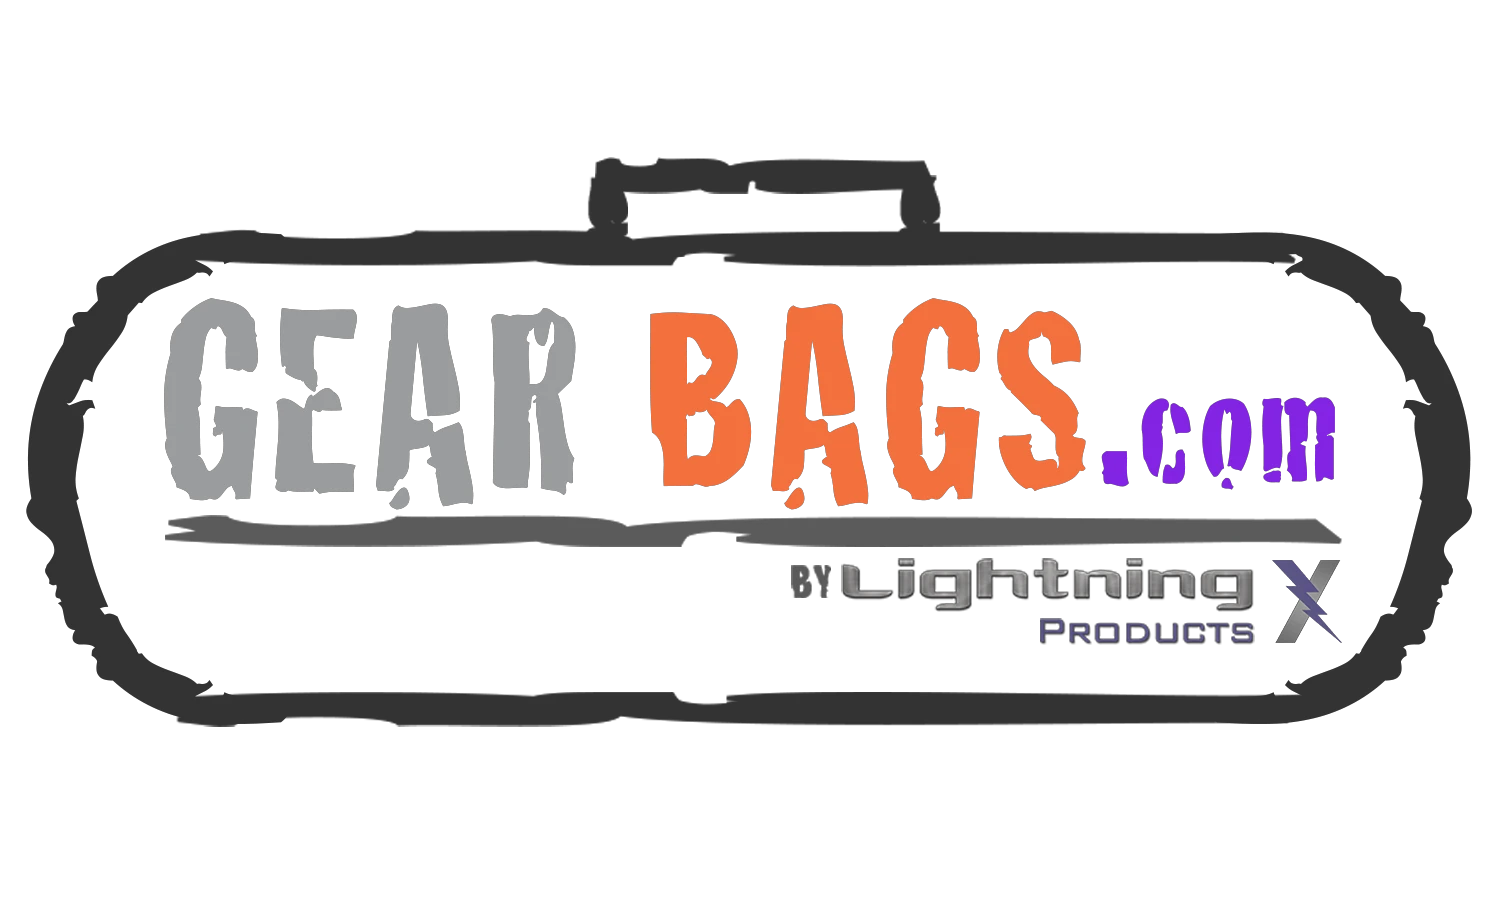 gearbags.com